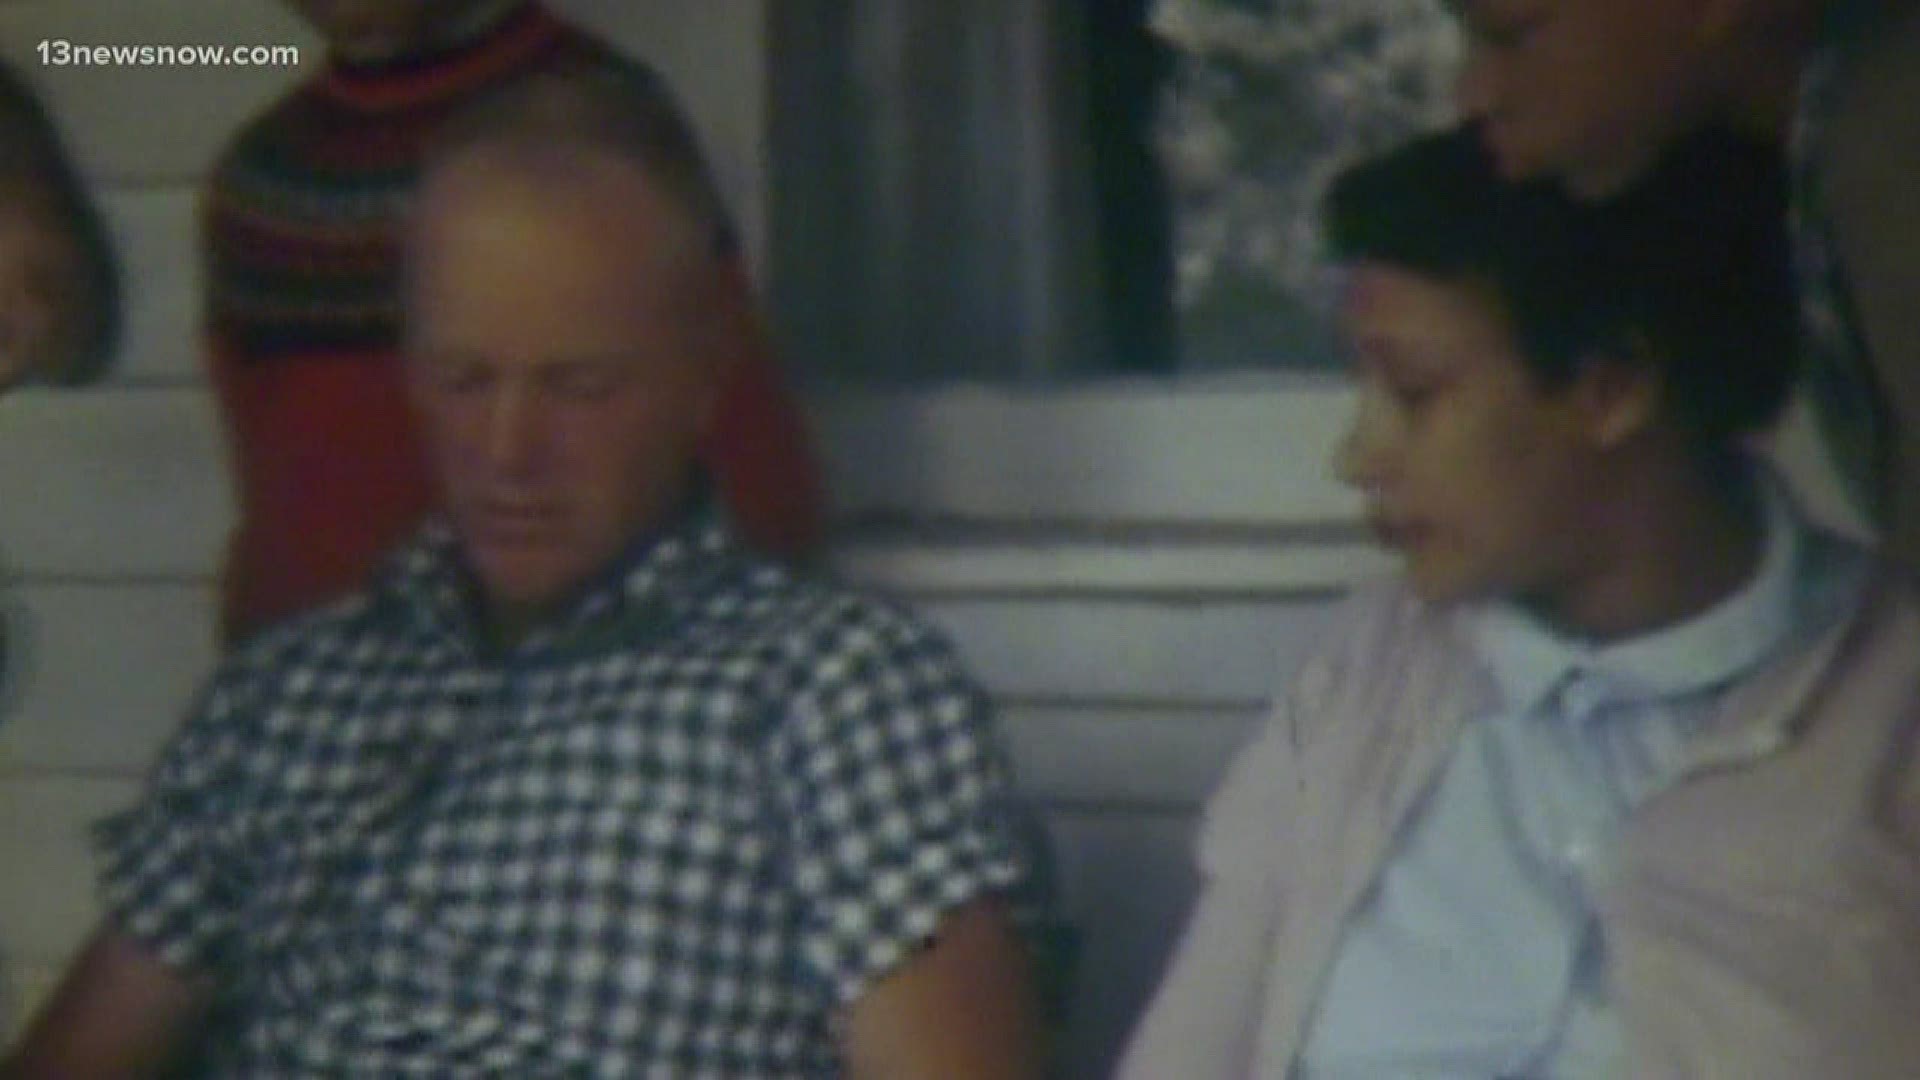 Mildred and Richard Loving took their case to the highest court after they were arrested for living together as an interracial married couple in Virginia.